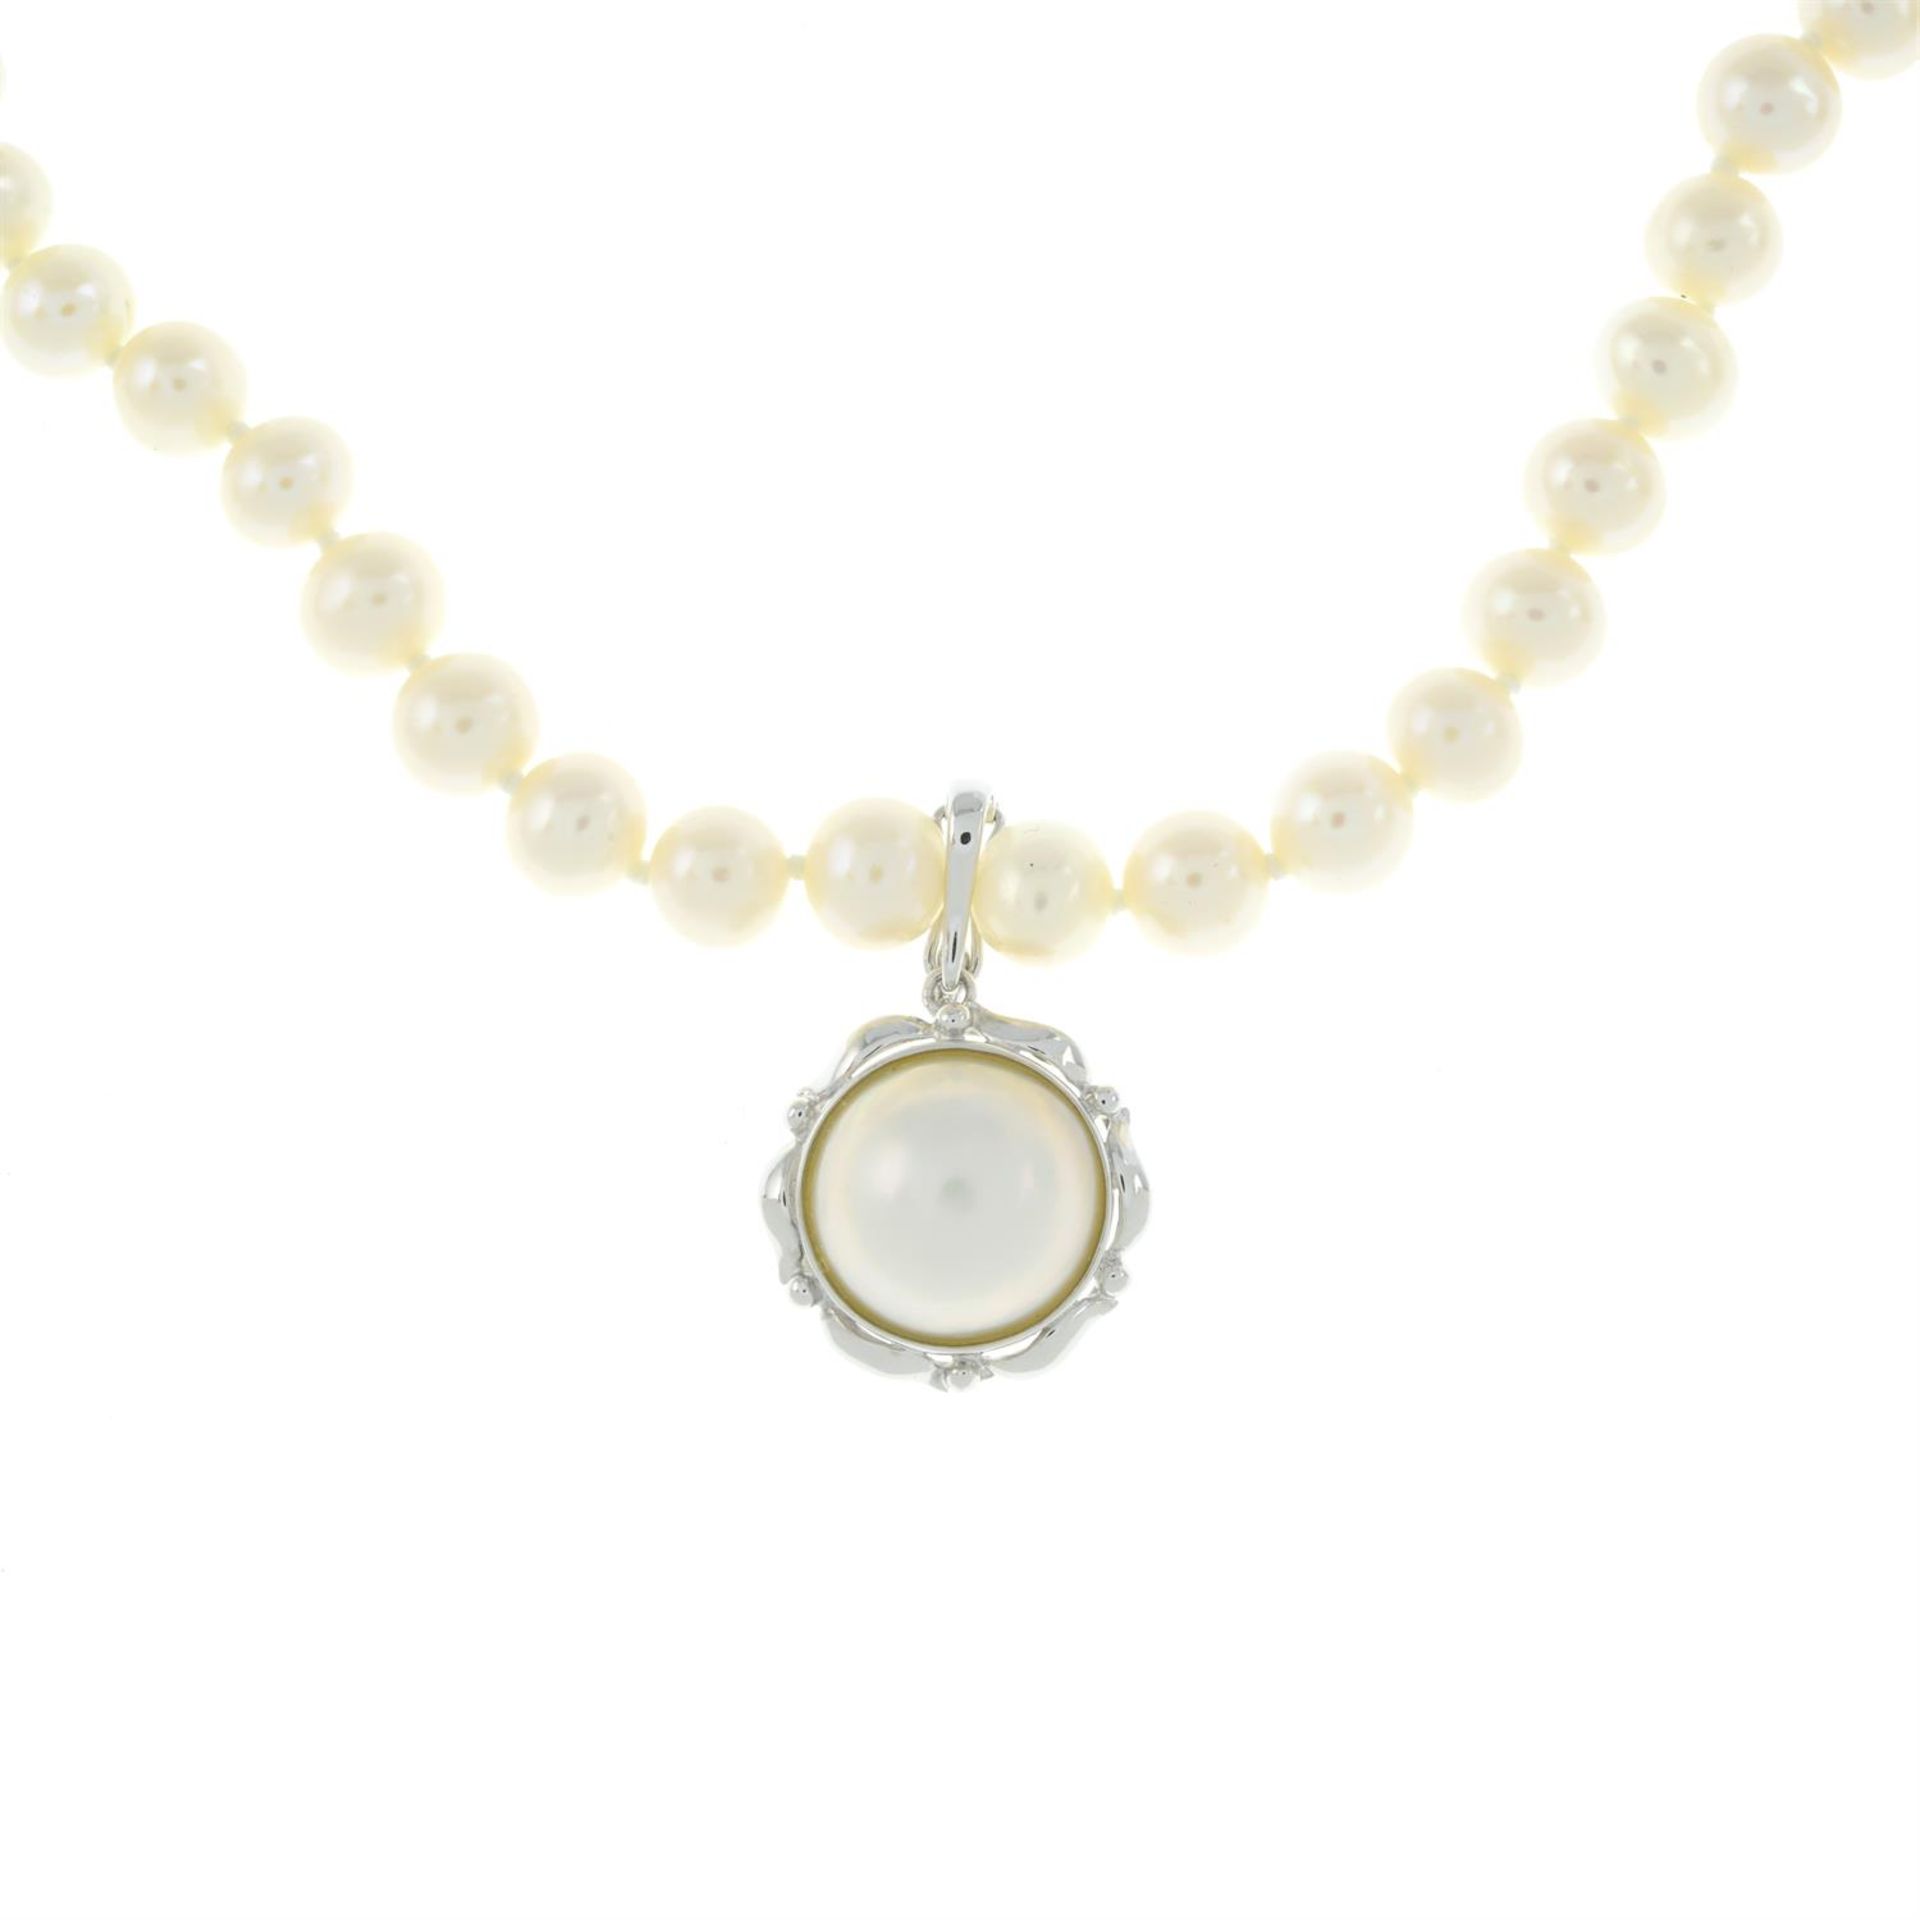 18ct gold cultured pearl necklace, with mabé pearl pendant - Image 2 of 2